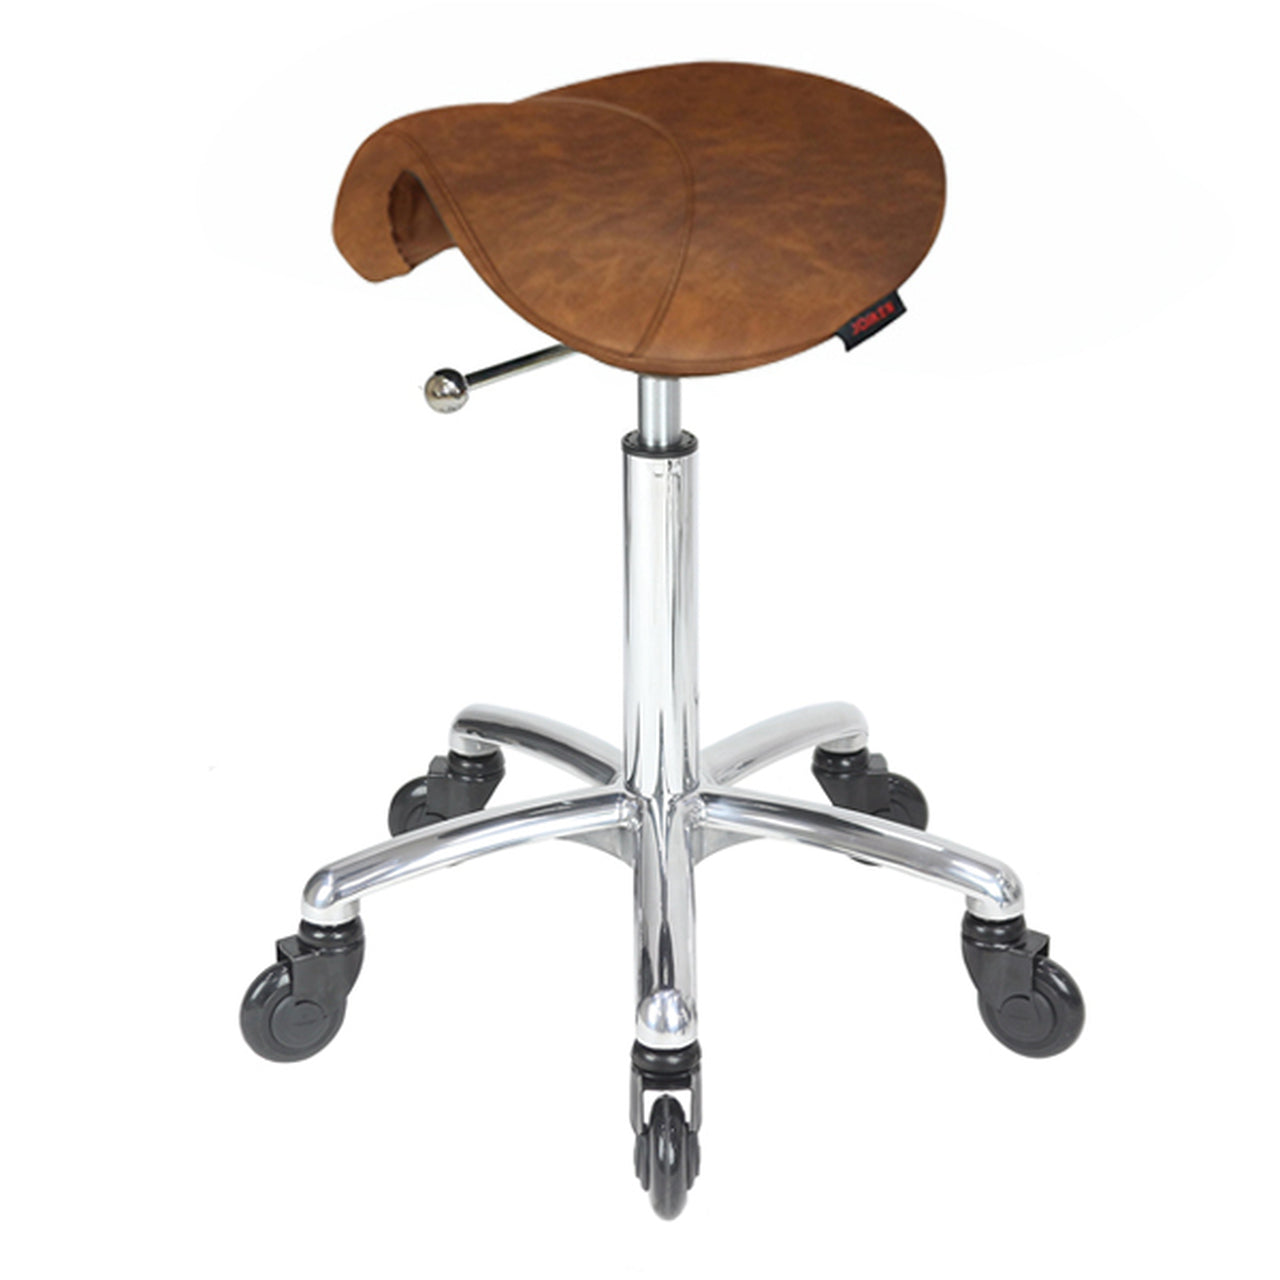 Saddle - No Back - Chrome Base - (TAN Upholstery)
With CLICK'NCLEAN Castors